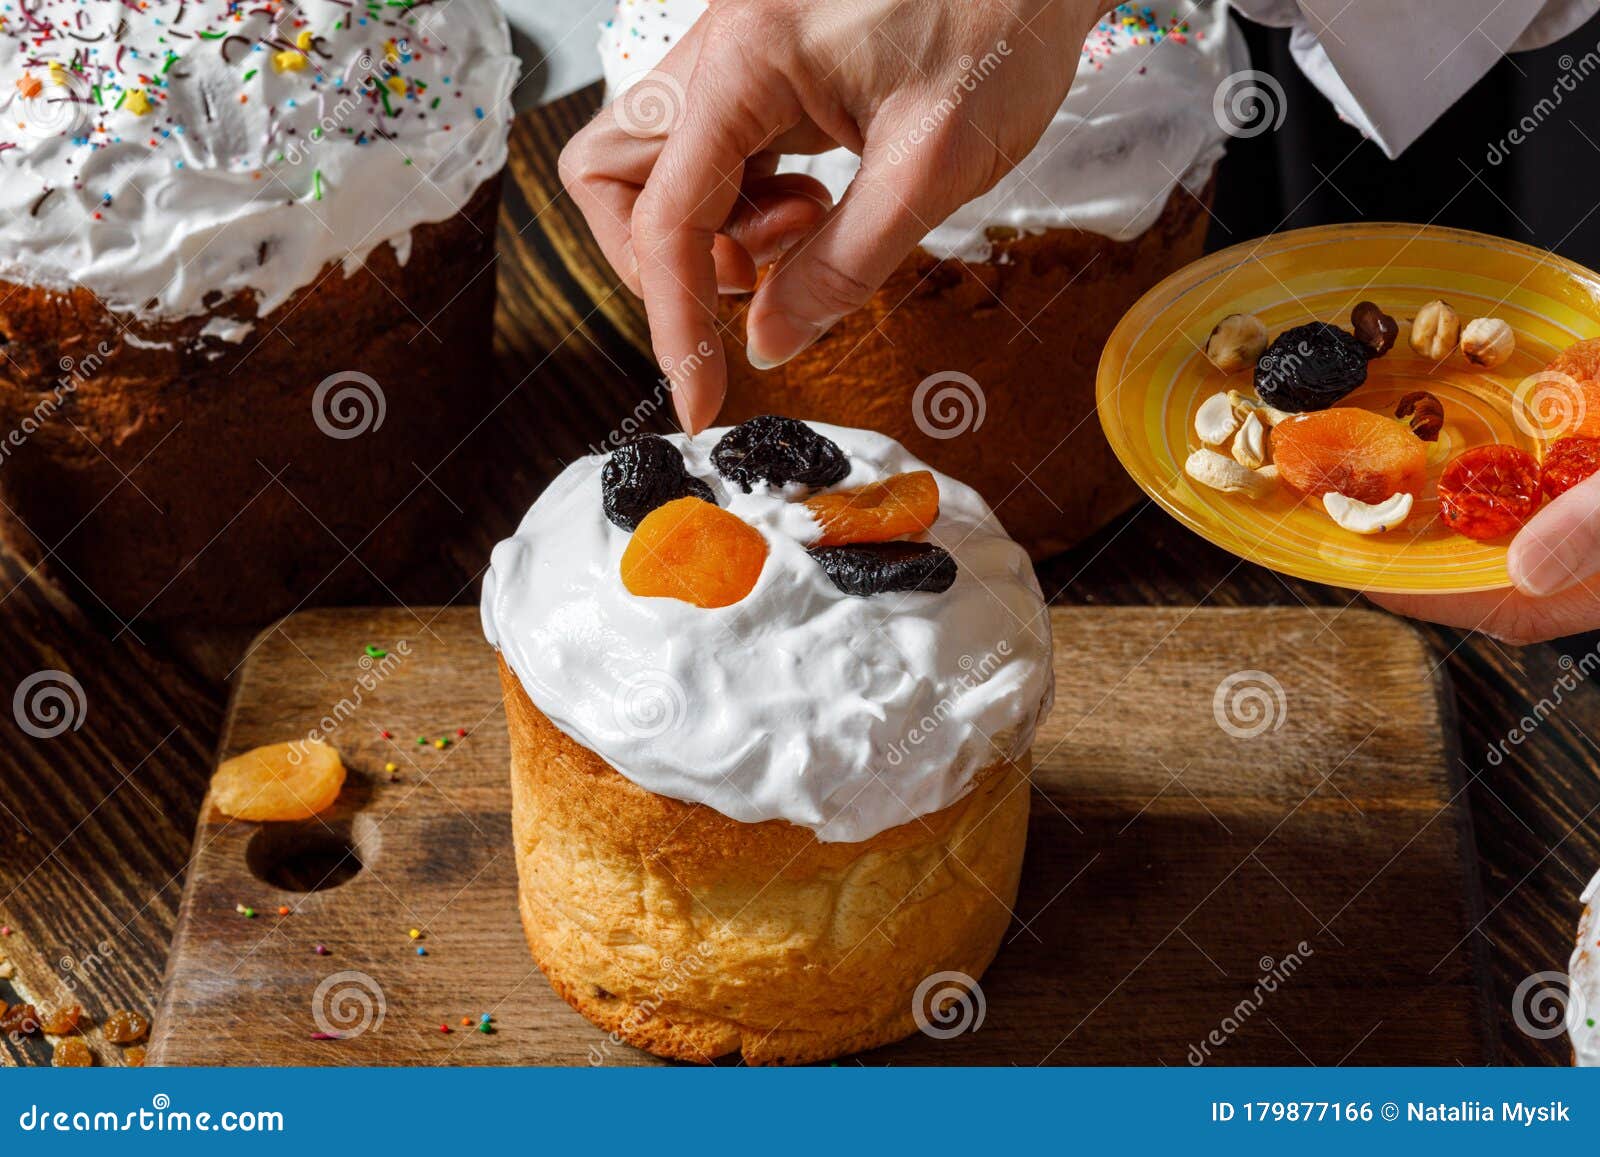 cook decorates easter cake with dried fruits